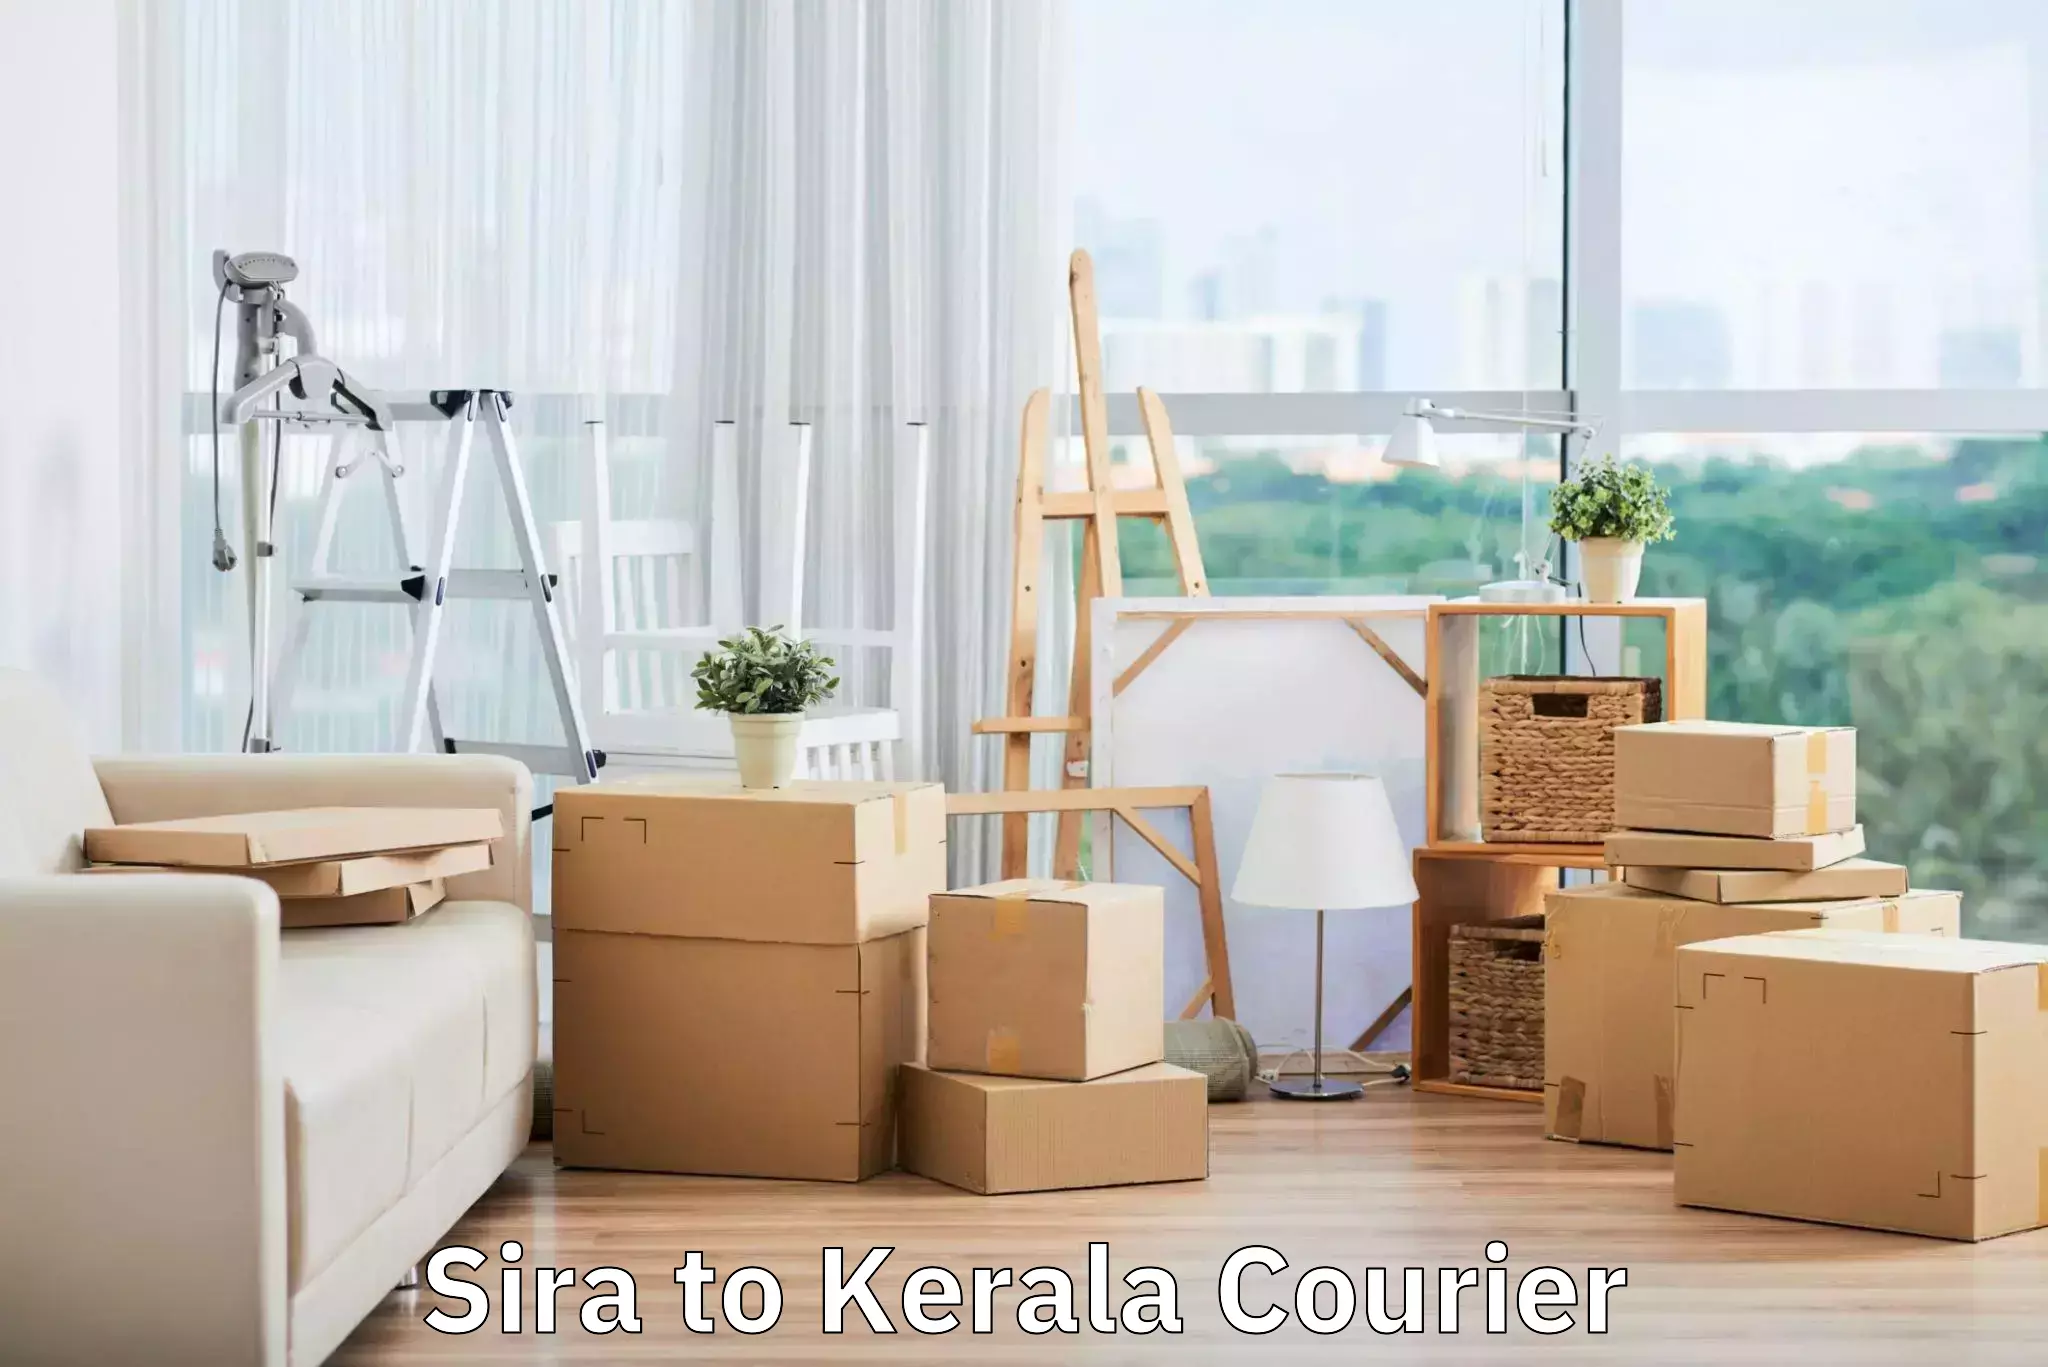 Luggage transport guidelines Sira to Kerala